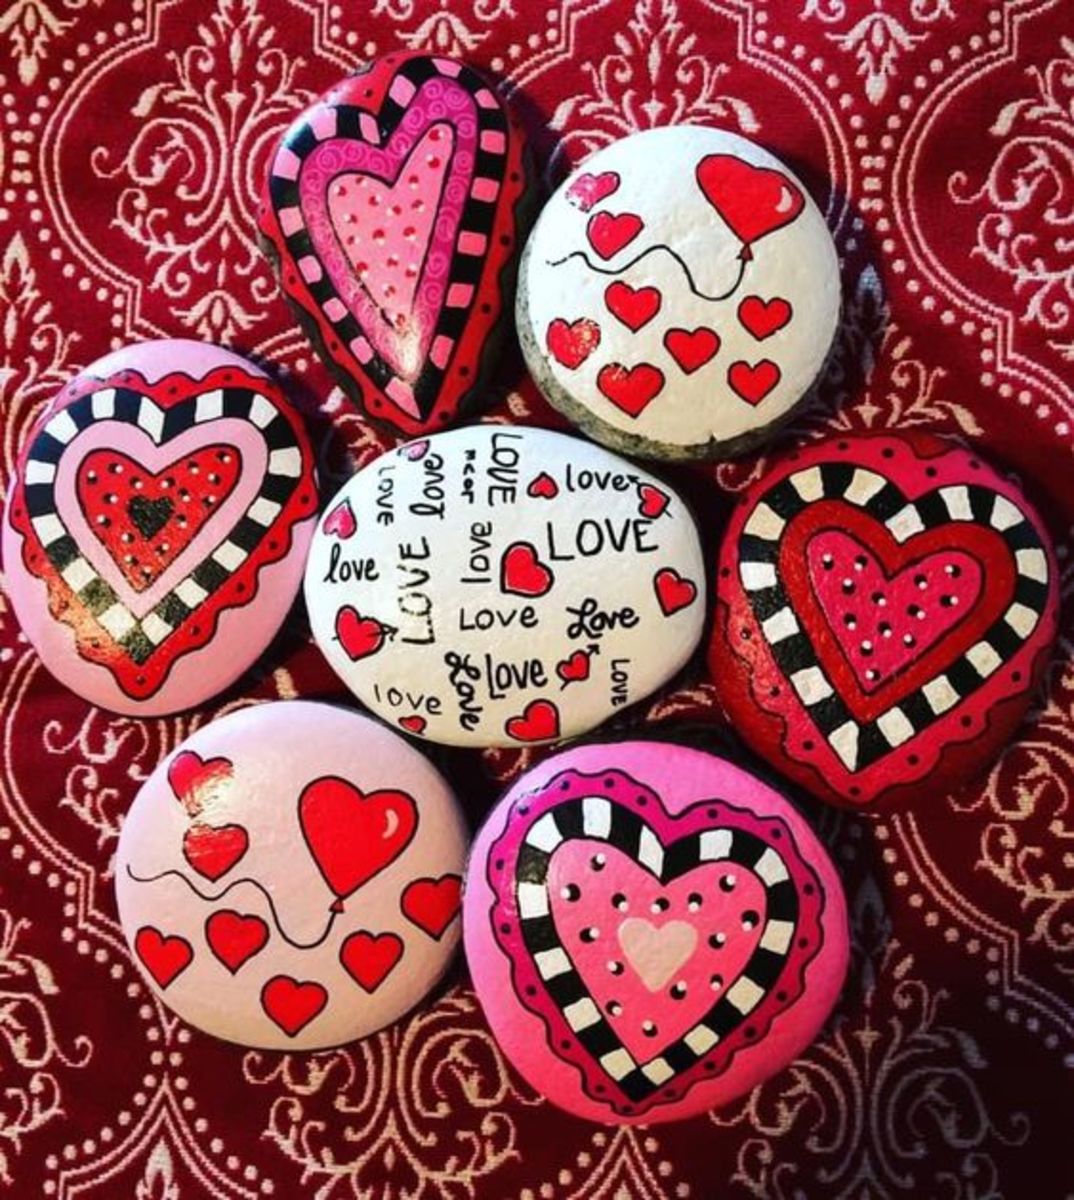 https://images.saymedia-content.com/.image/t_share/MTk1NDIwMzE5MTM2Mjk0NjQ2/110-easy-valentines-crafts-kids-will-love-to-make.jpg